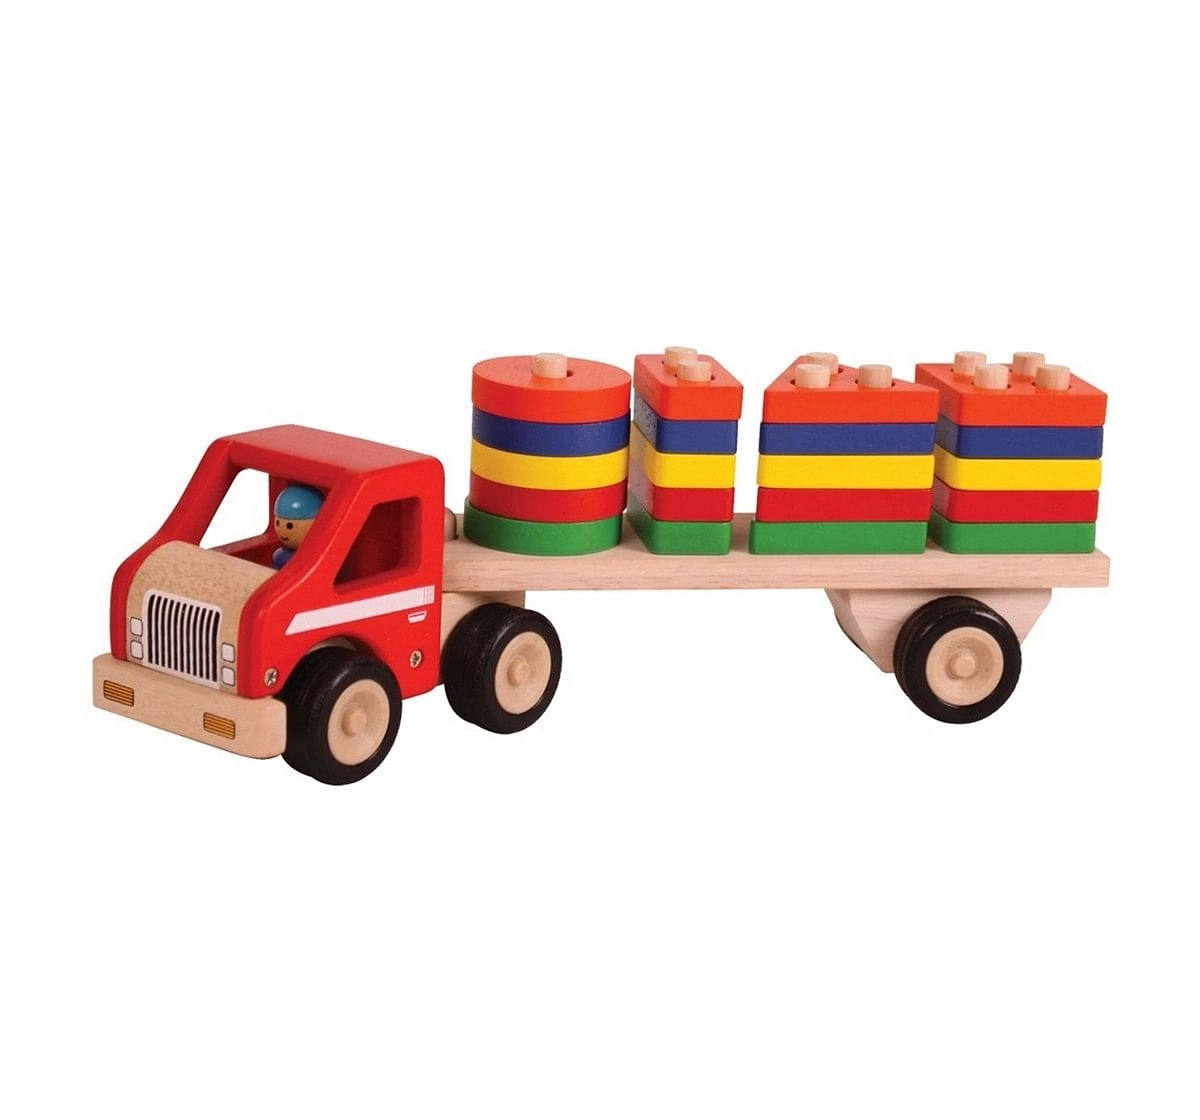 Brainsmith Super Shape Sorting Lorry Wooden Toy for Kids age 2Y+ 